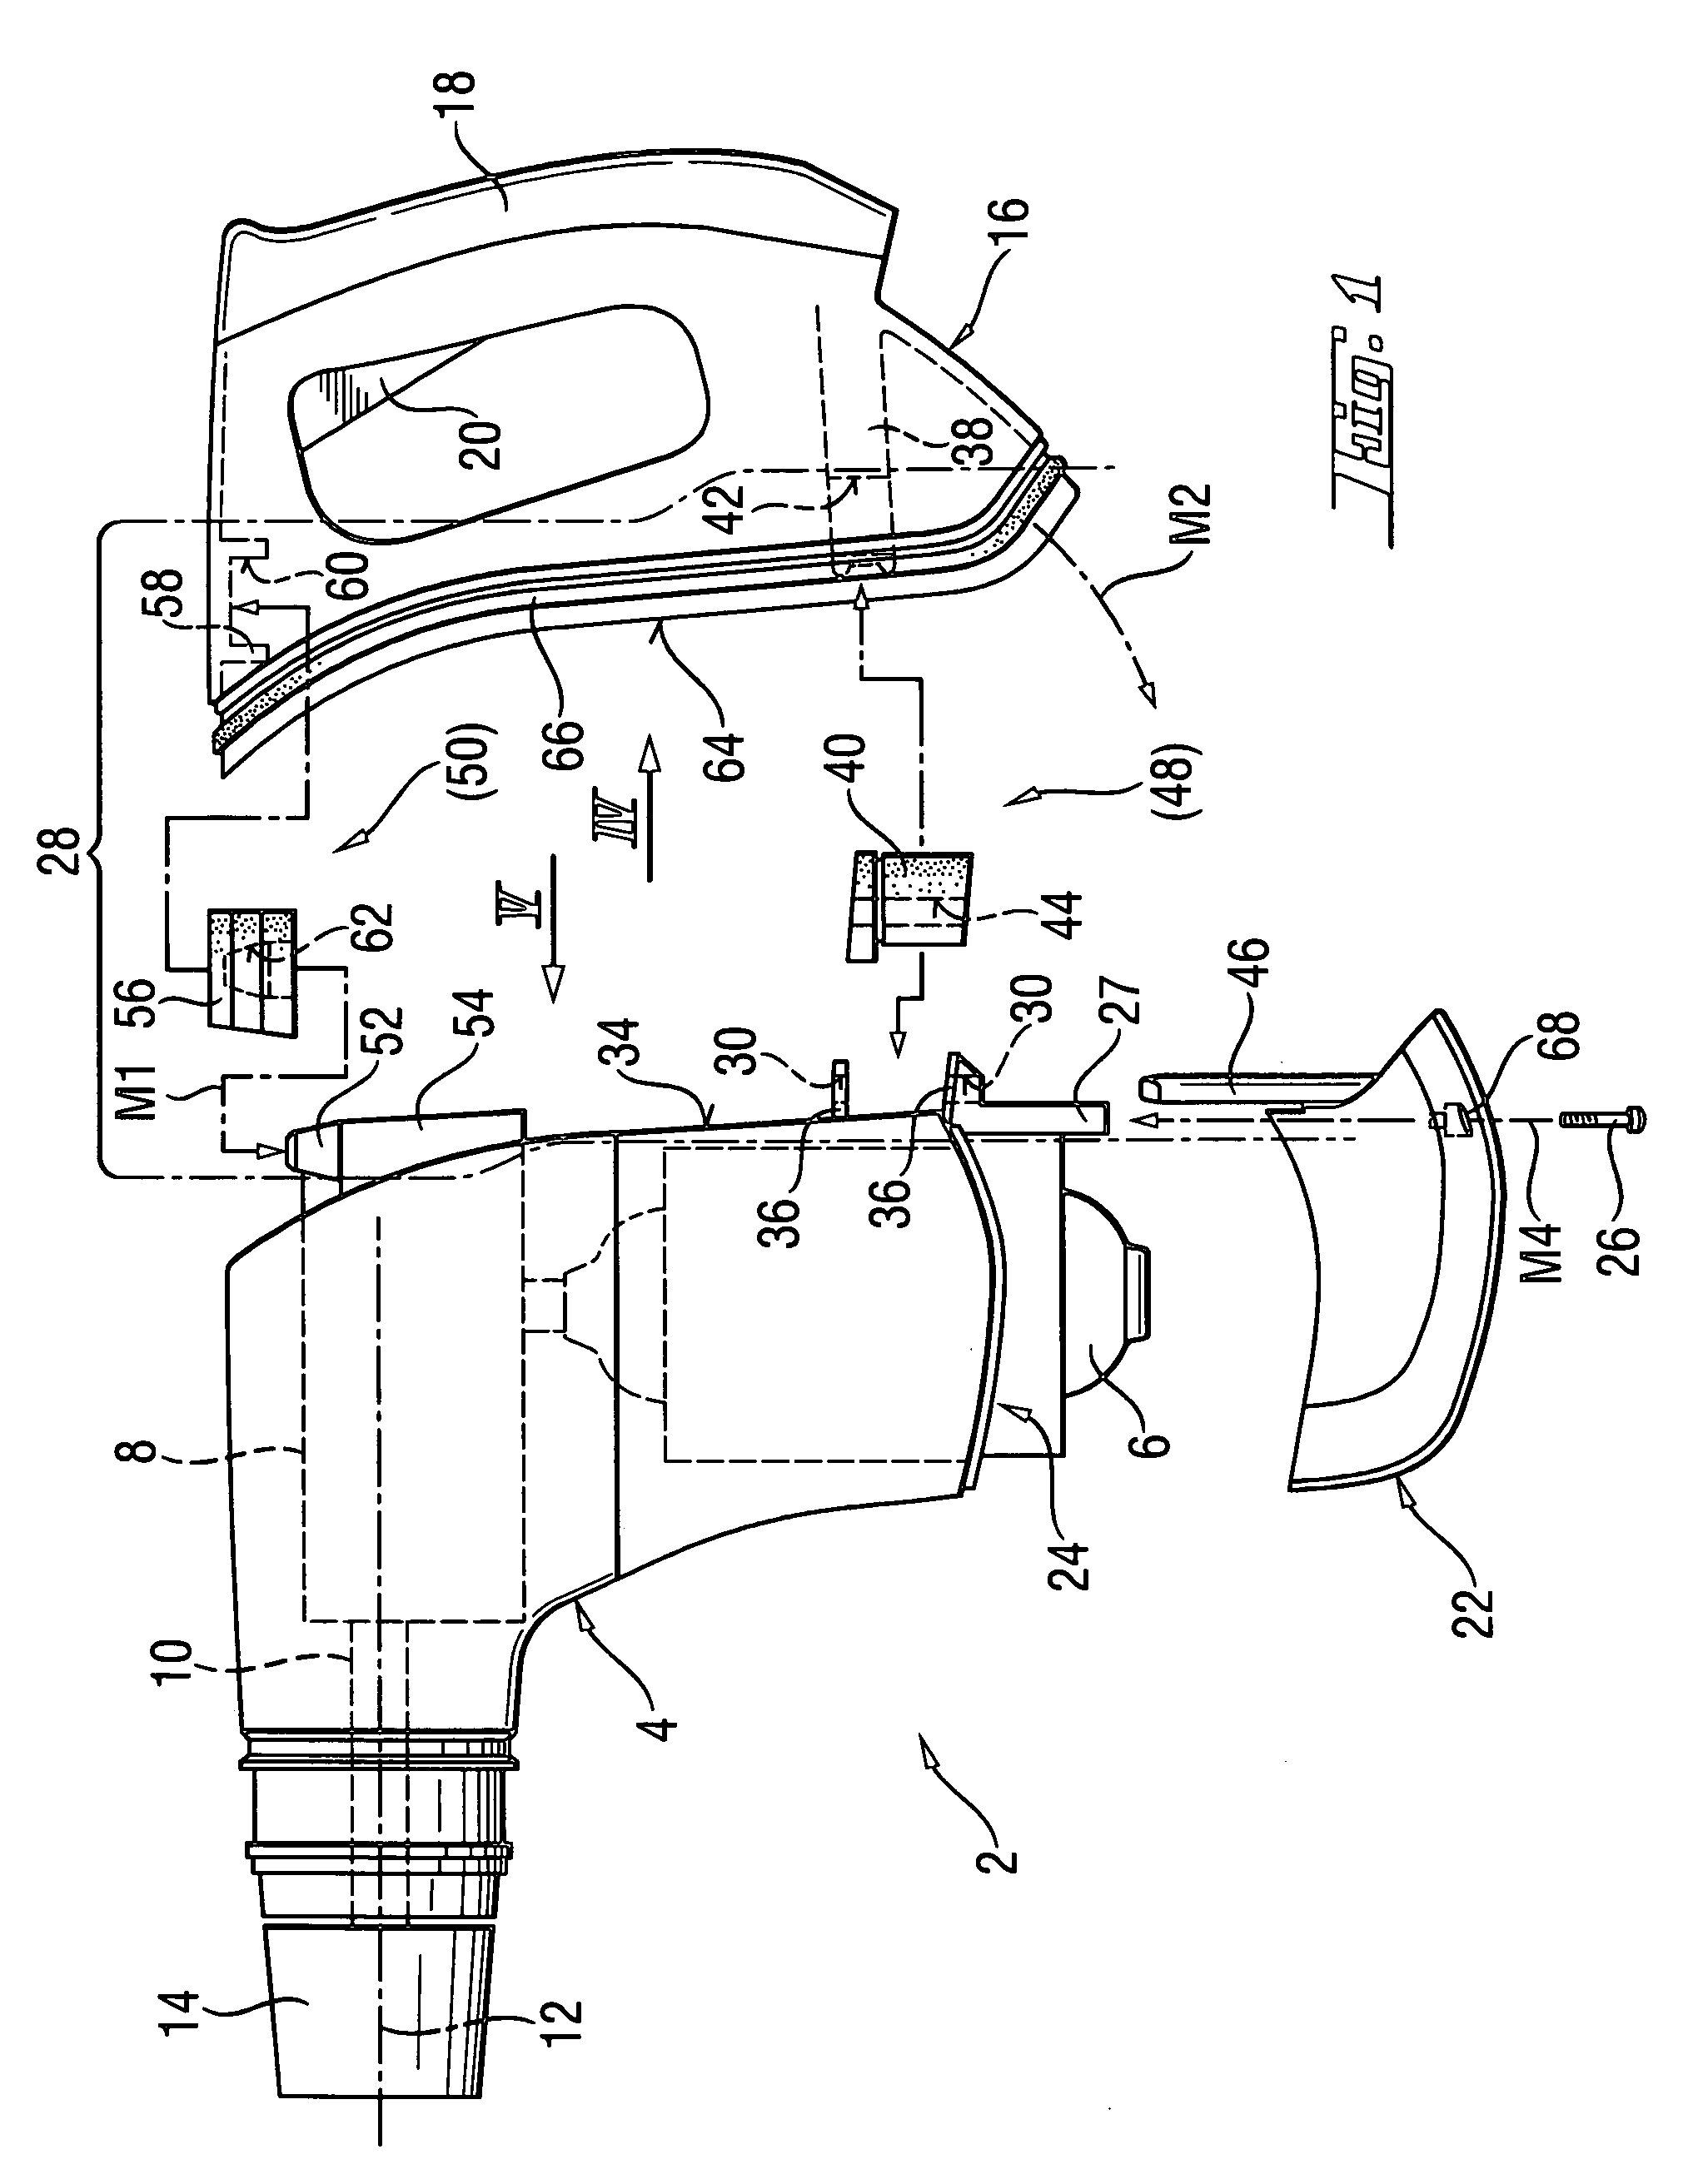 Hand-held power tool having main and handle housings with a connection device for connecting the housings